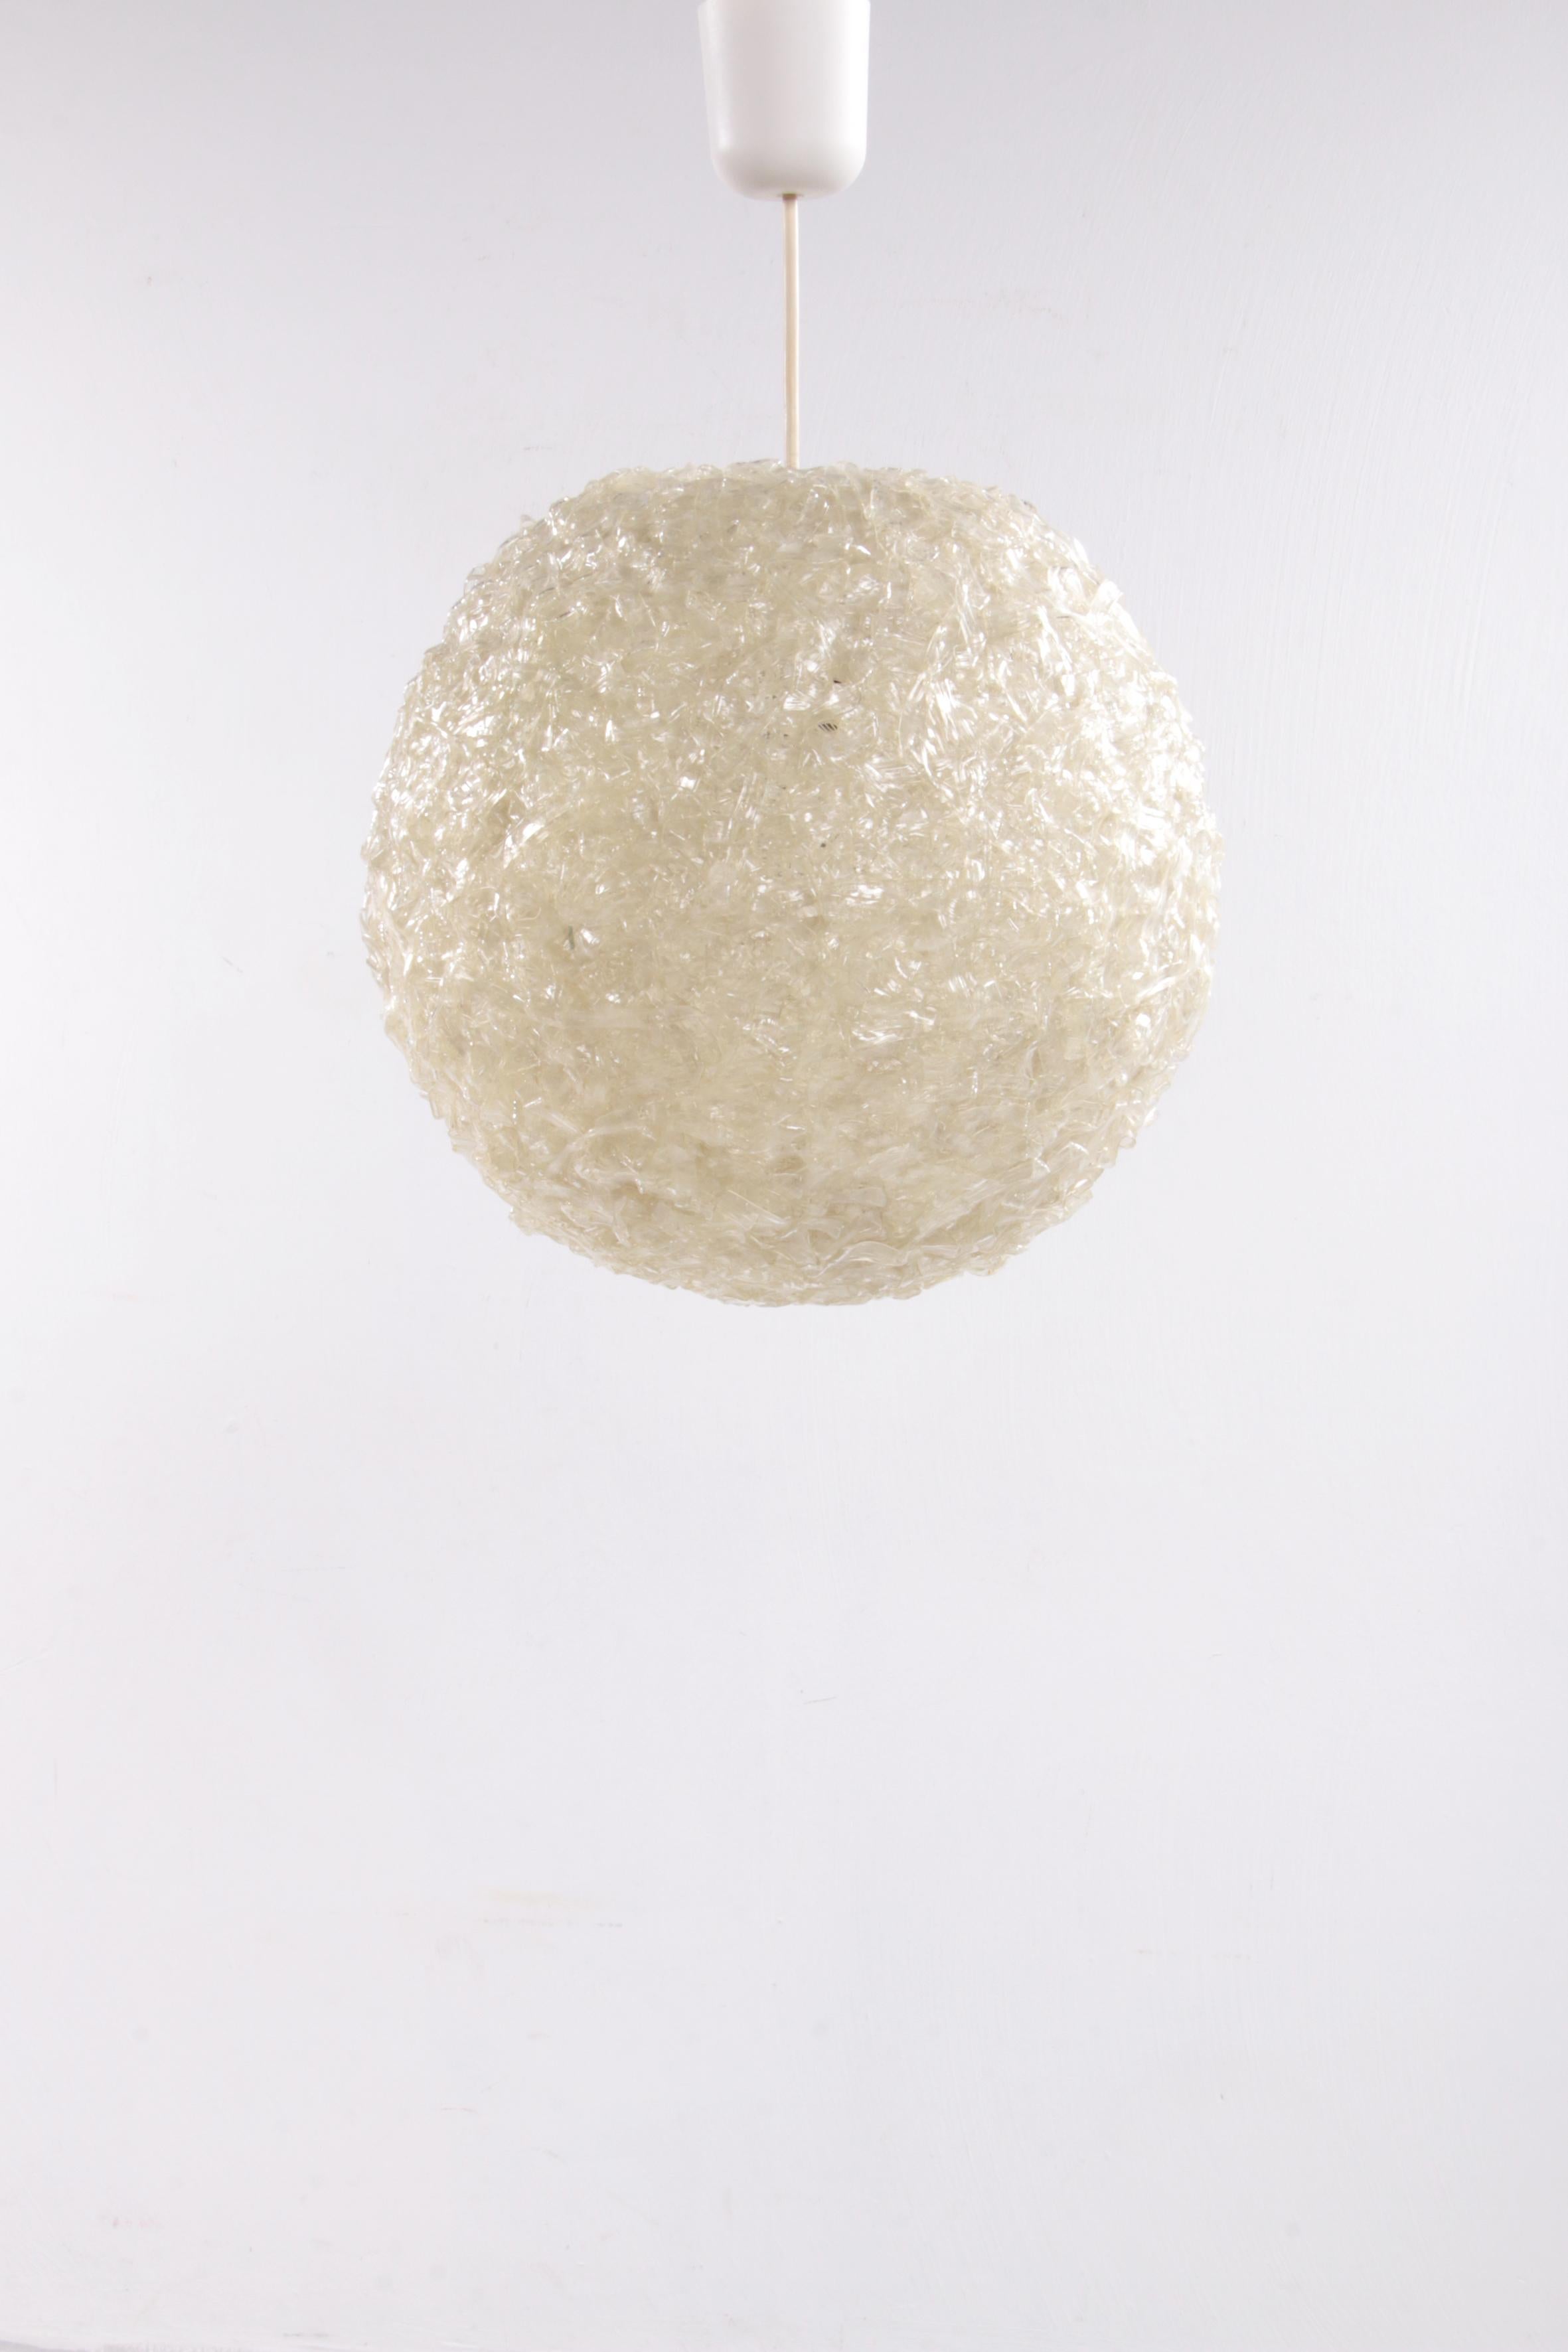 Vintage hanging lamp with beautiful coarse structure 1960 Germany.

Hanging lamp just the name is already beautiful and beautiful light.

Beautiful hanging lamp beautiful white of sprinkled coarse crystals on a Rotaflex (cellulose acetate)